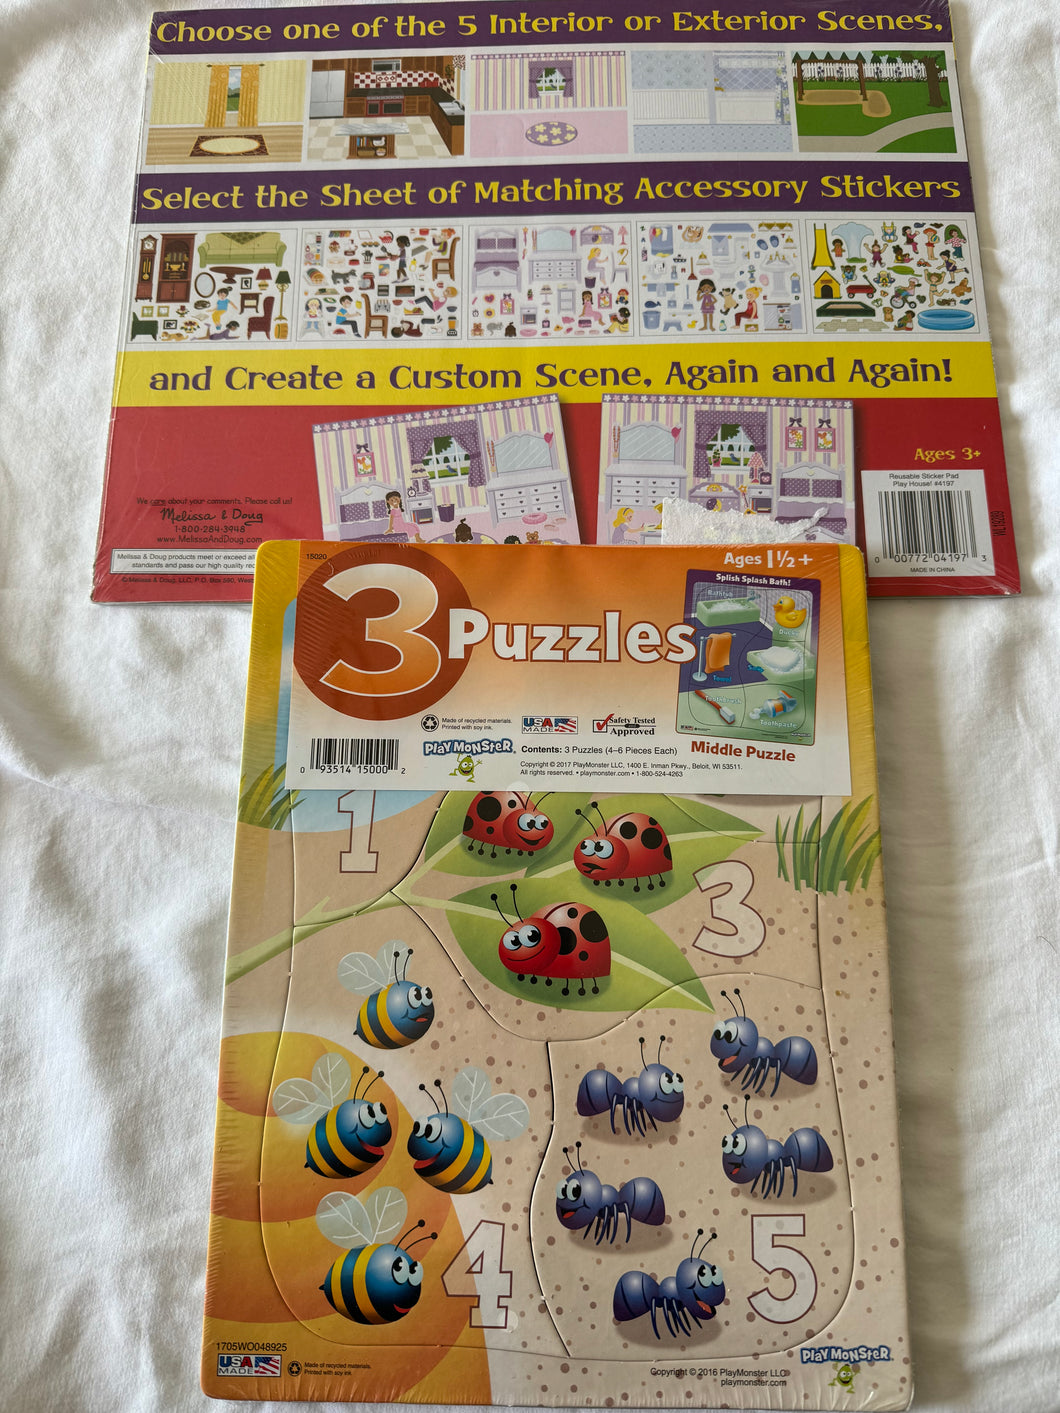 Three 5 Piece Puzzles Bug Numbers, Bath Time and Farm Animals for Age 1 and 1/2. New in Package. Melissa and Doug Reusable Sticker Pad Play House also New in Package for Age 3 Plus.